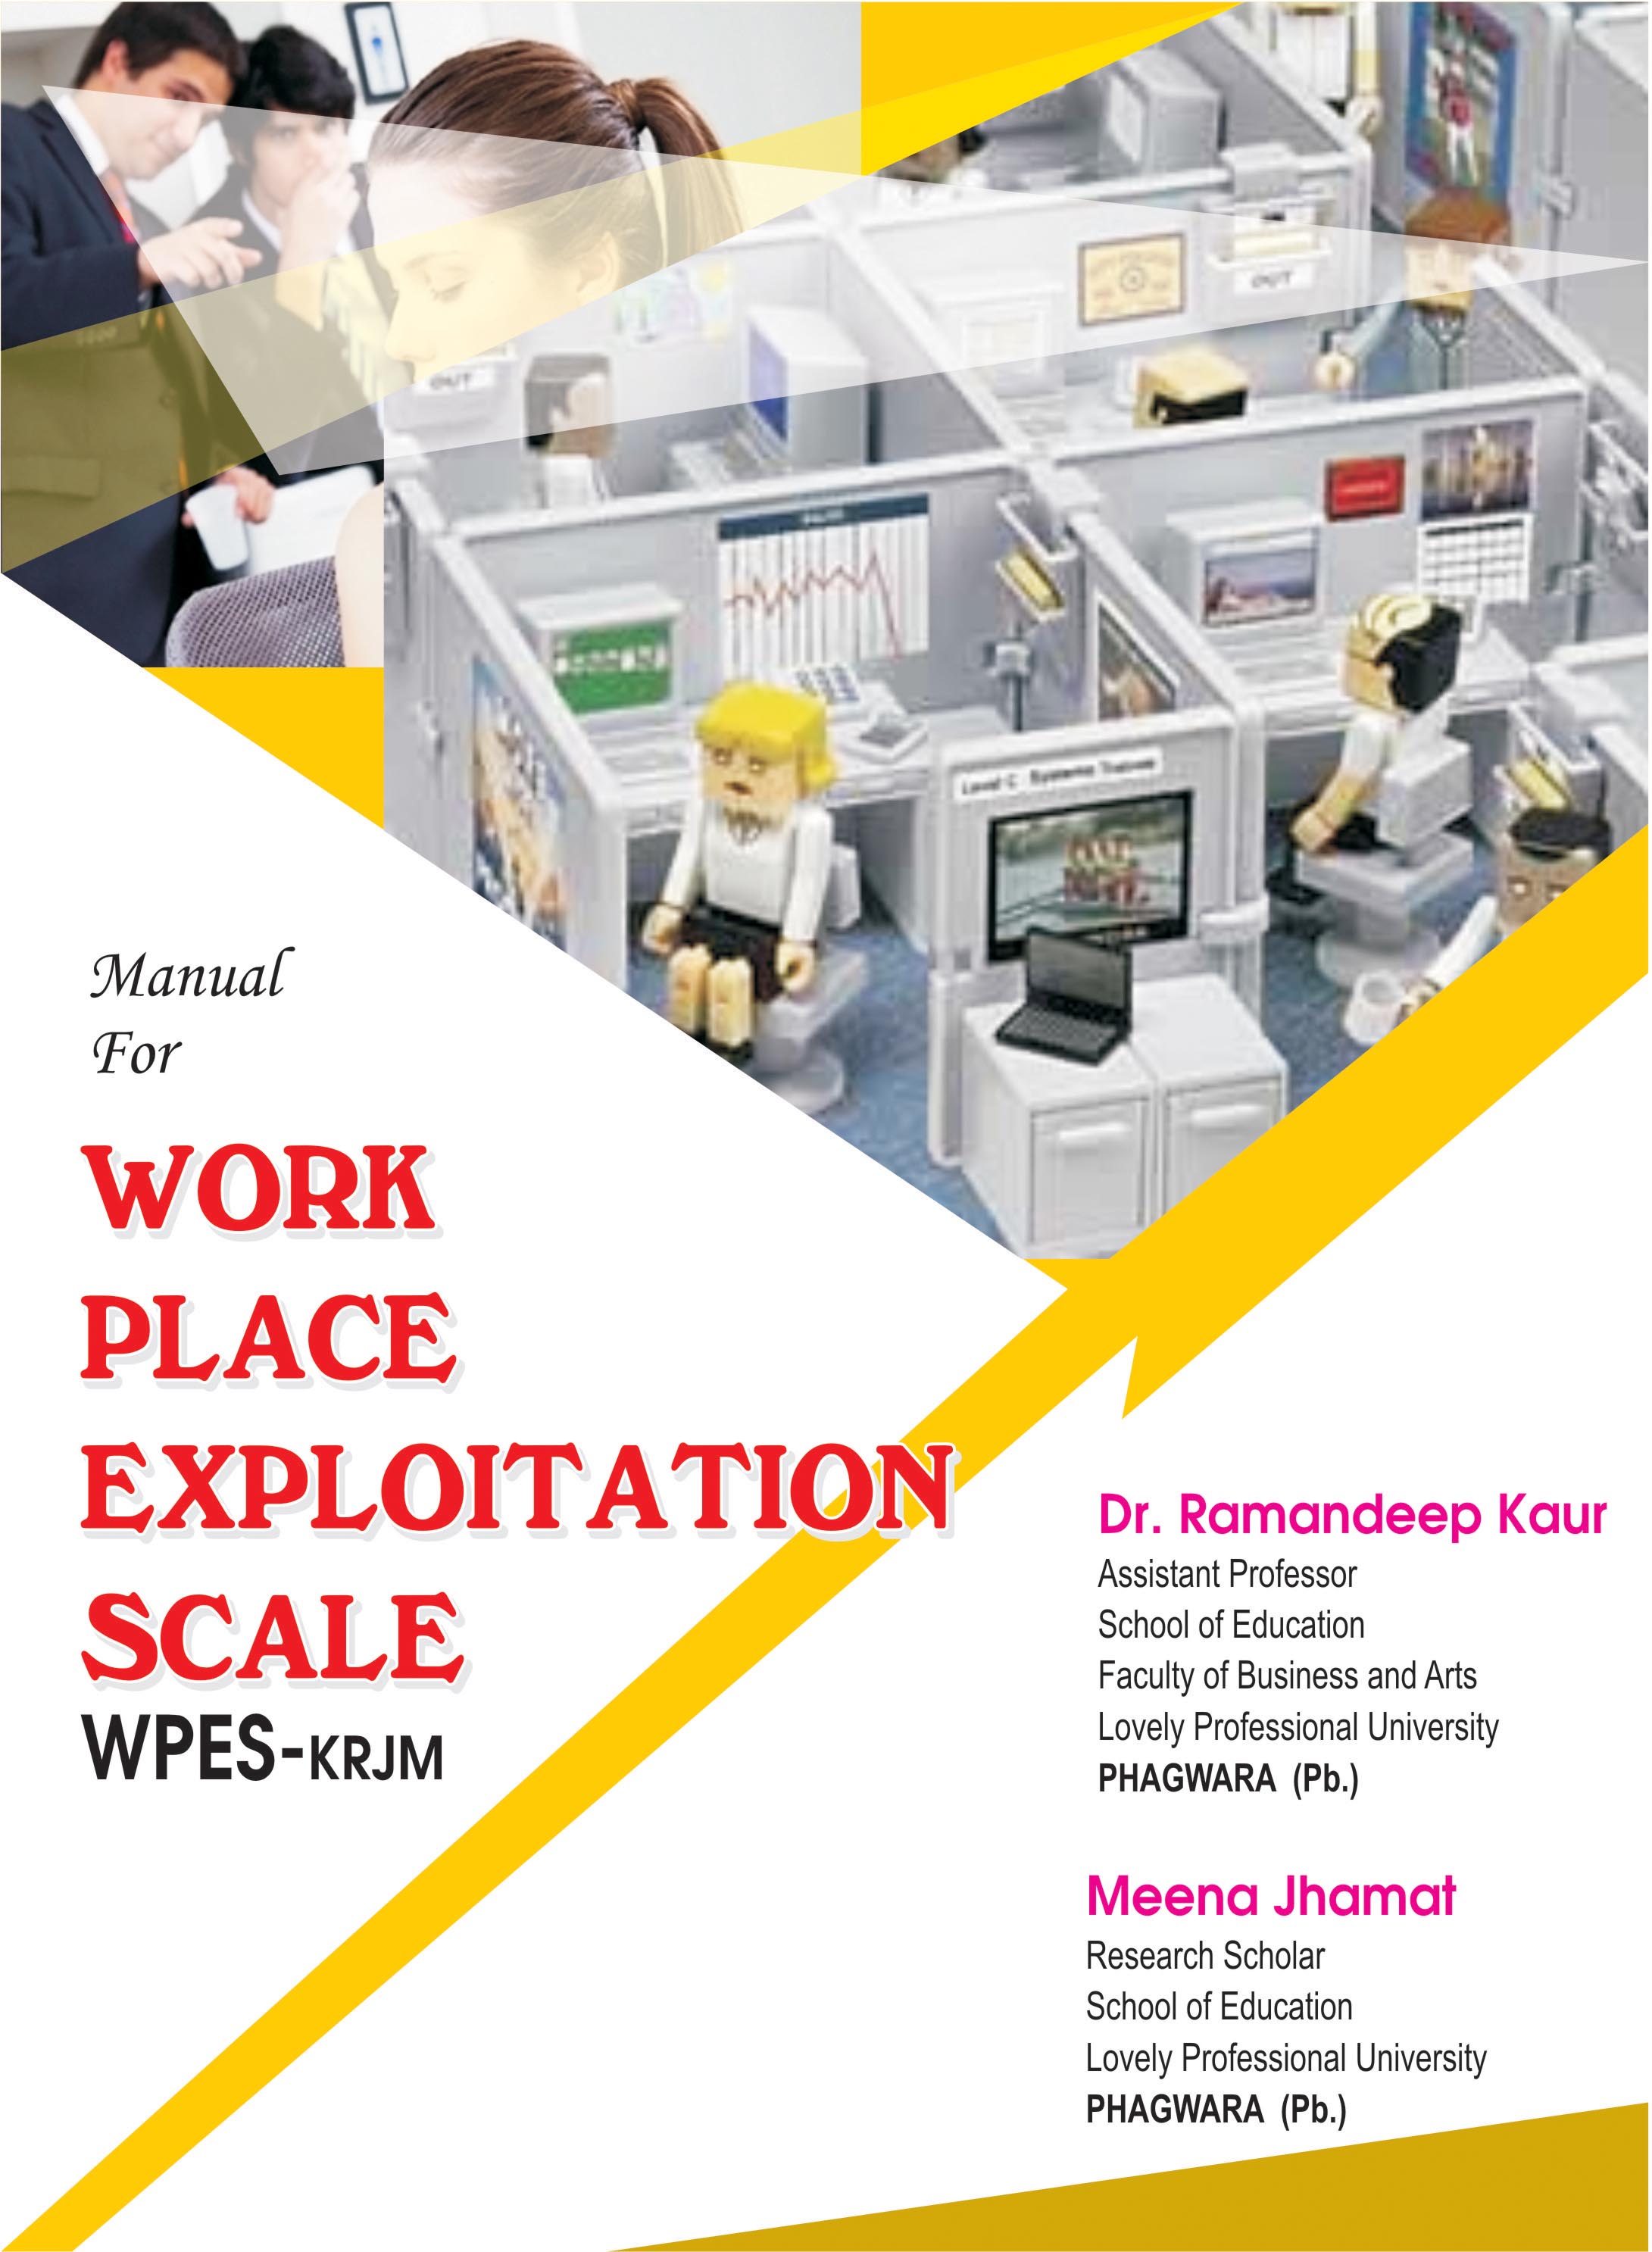 WORK-PLACE-EXPLOITATION-SCALE